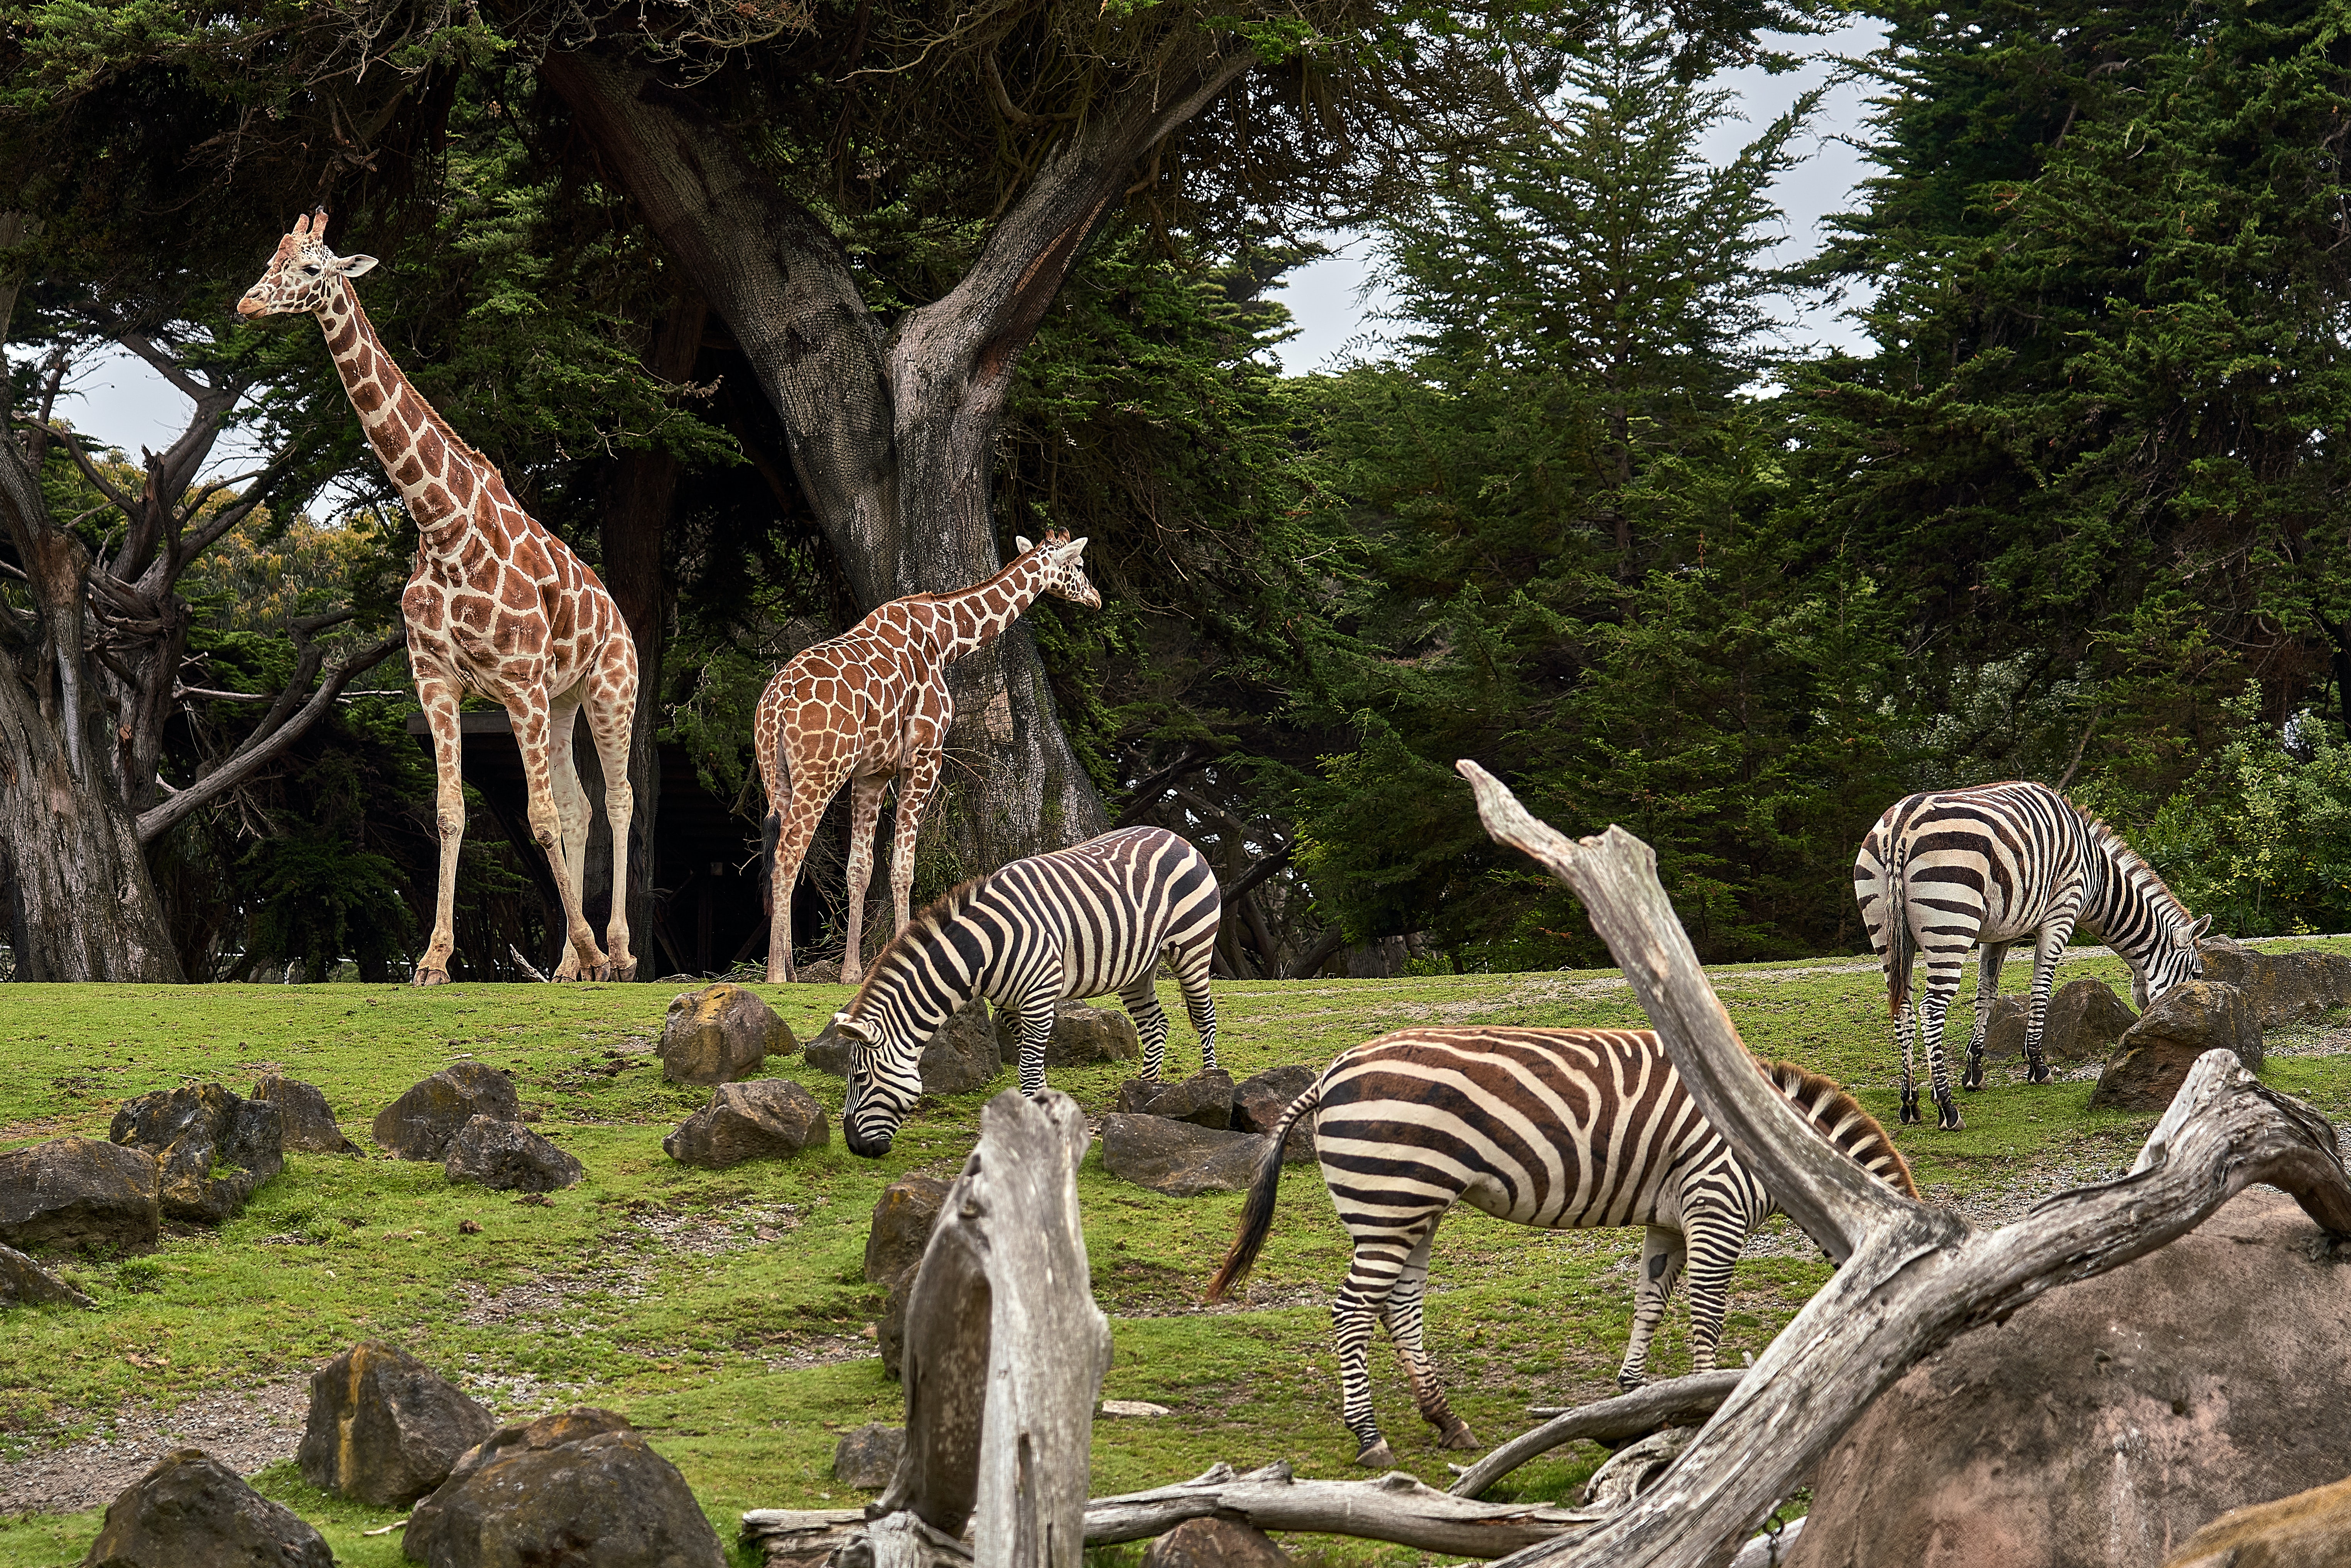 photo of giraffes and zebras in a zoo enclosure